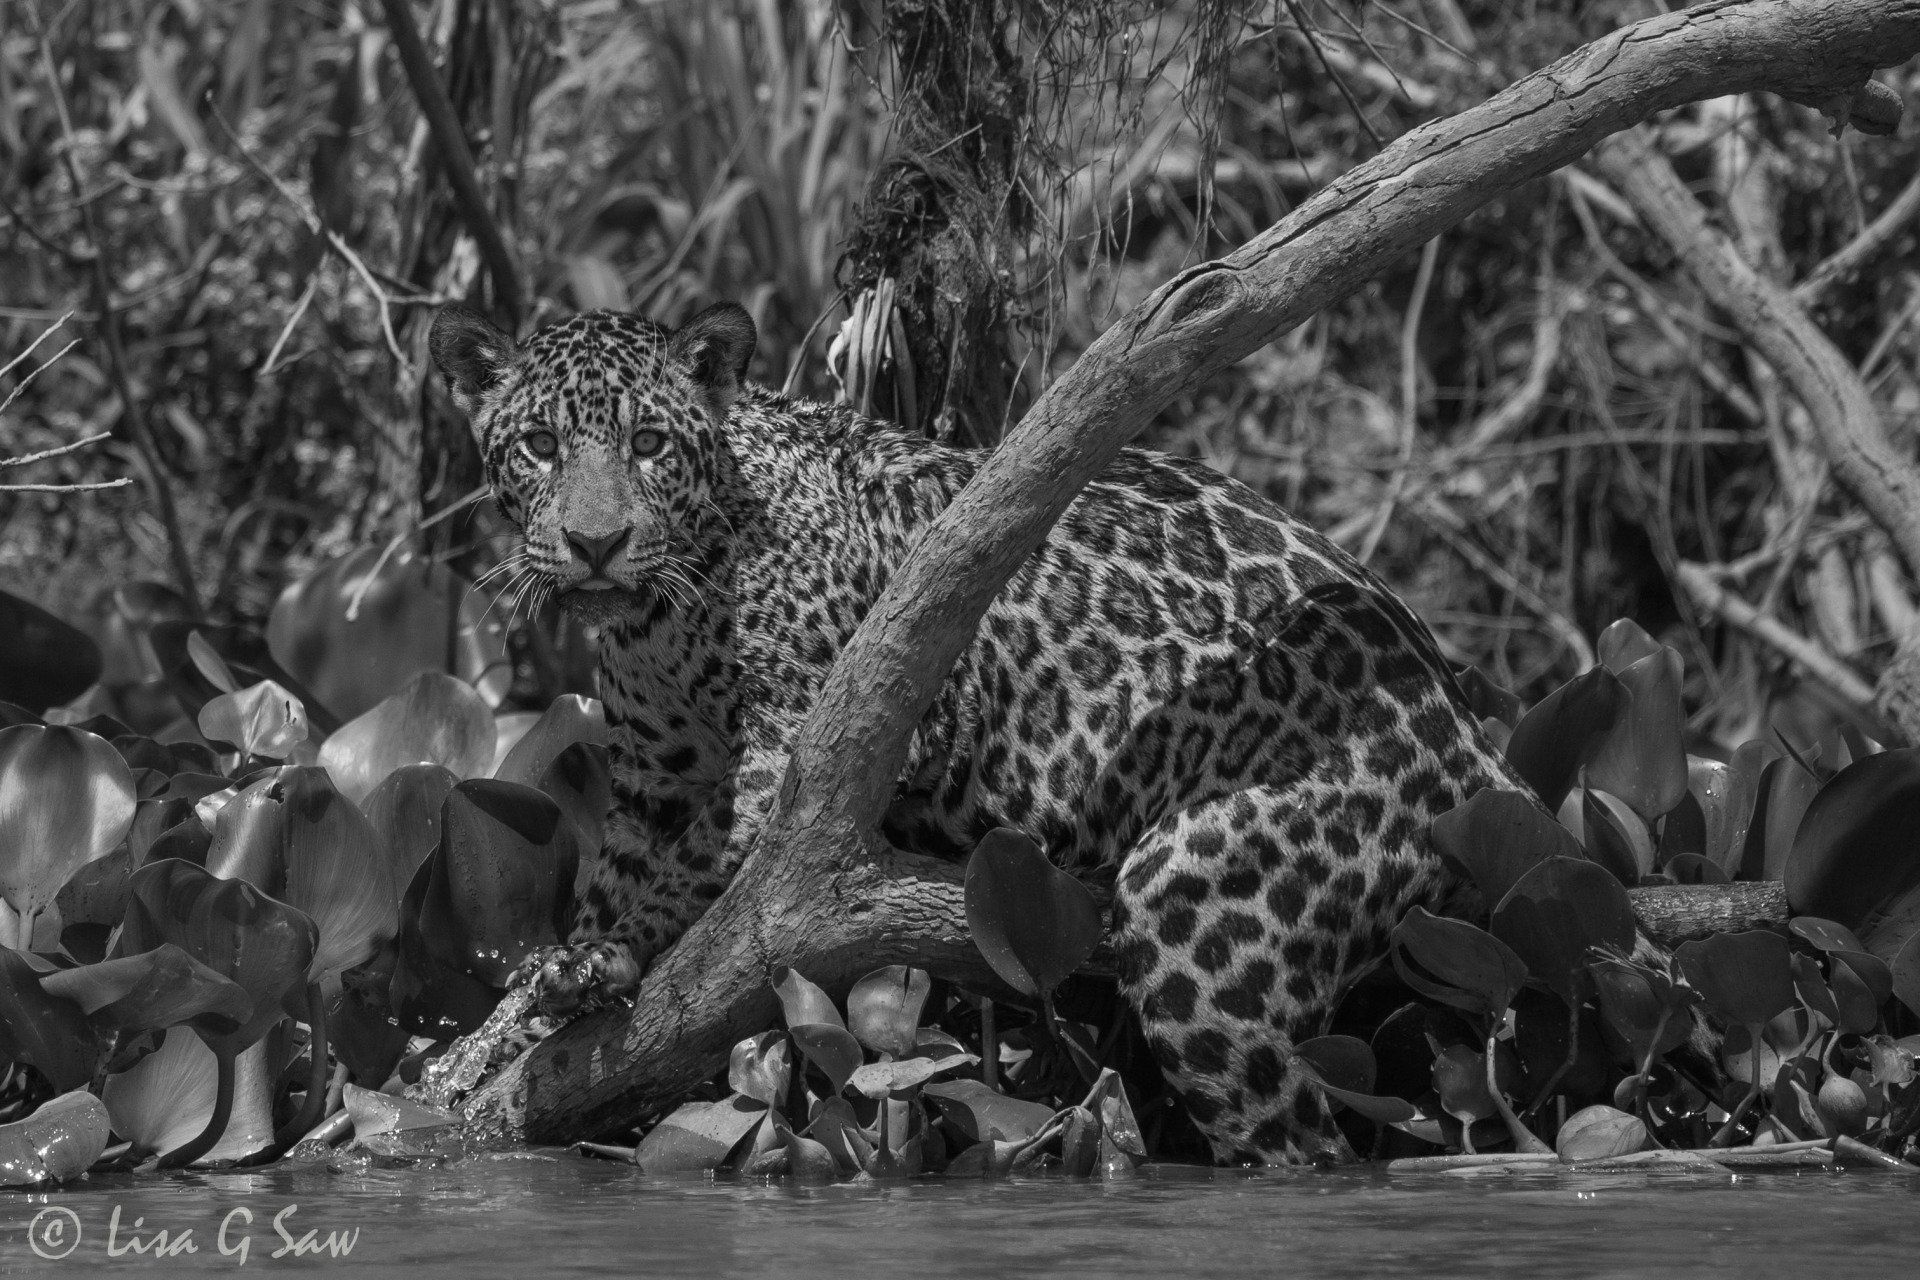 Jaguar clambering over branch in water (black and white)